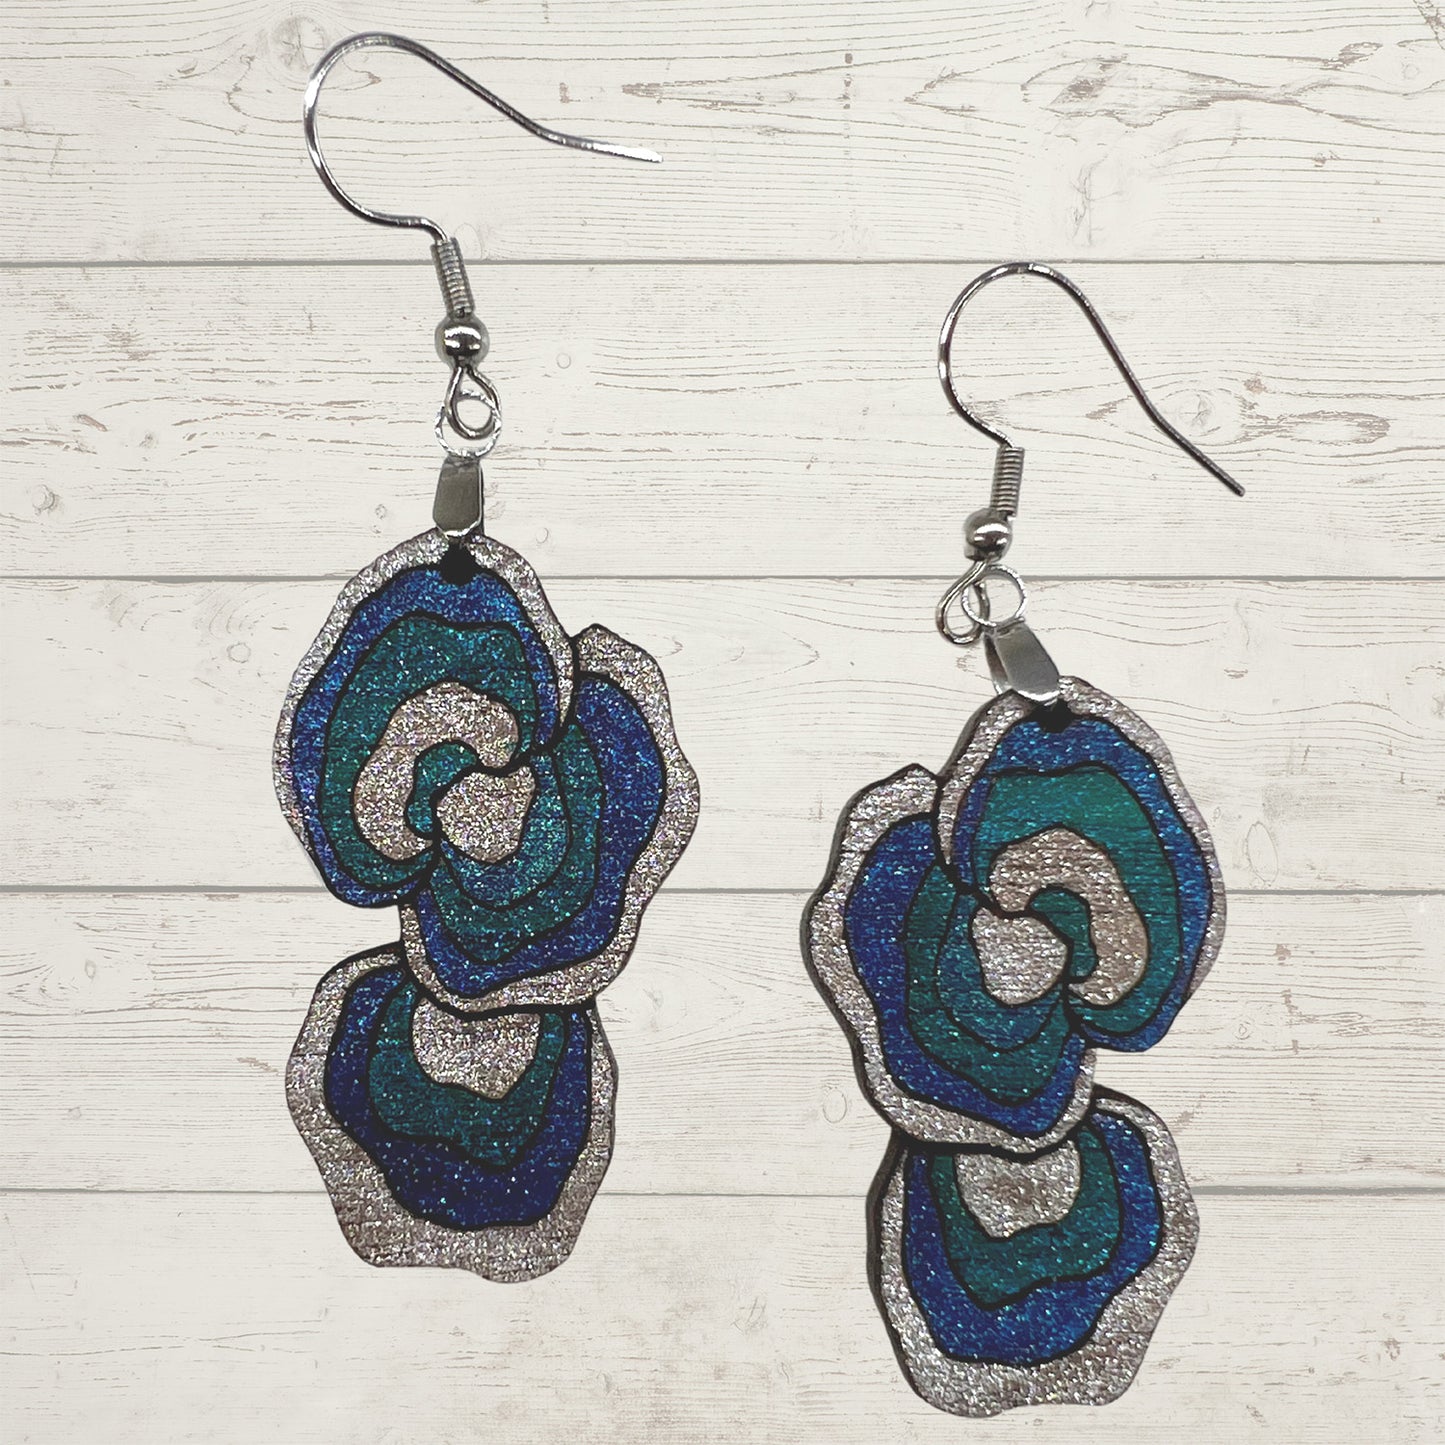 Abstract Layered Earrings - Unique Dangle Earrings